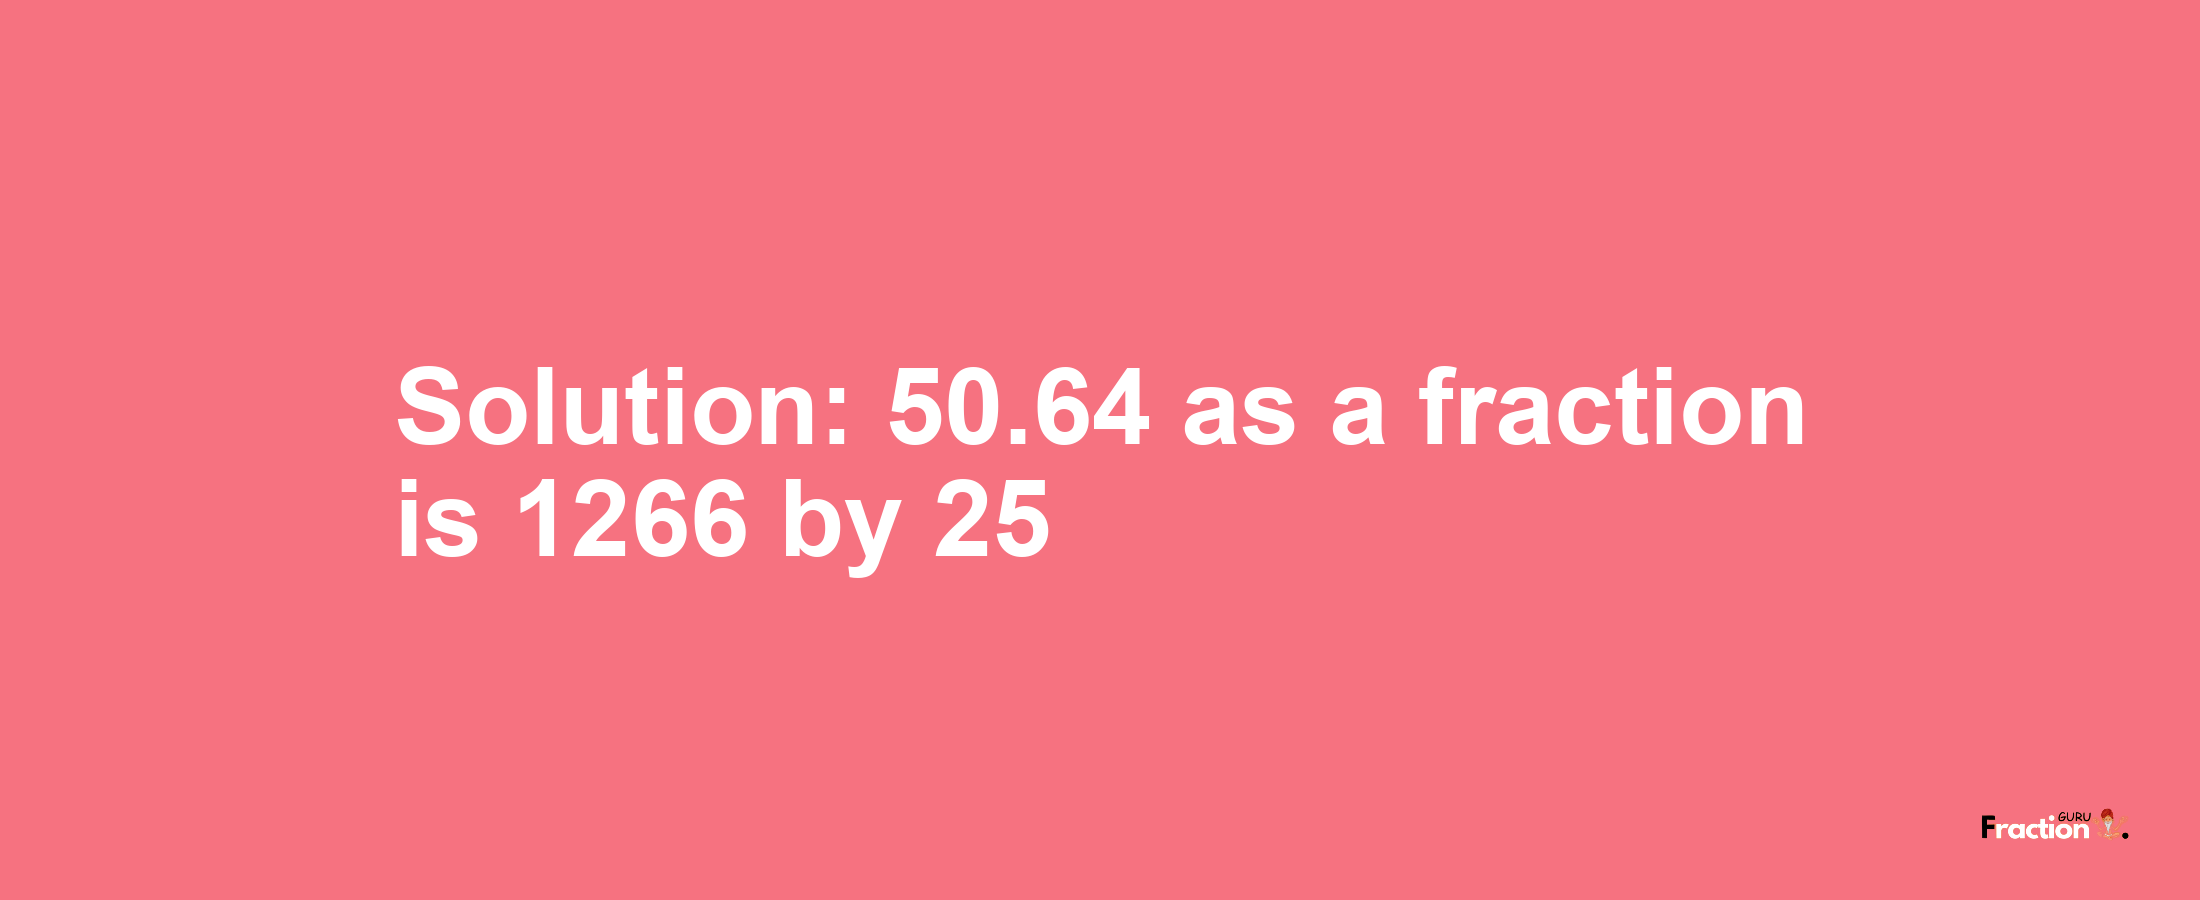 Solution:50.64 as a fraction is 1266/25